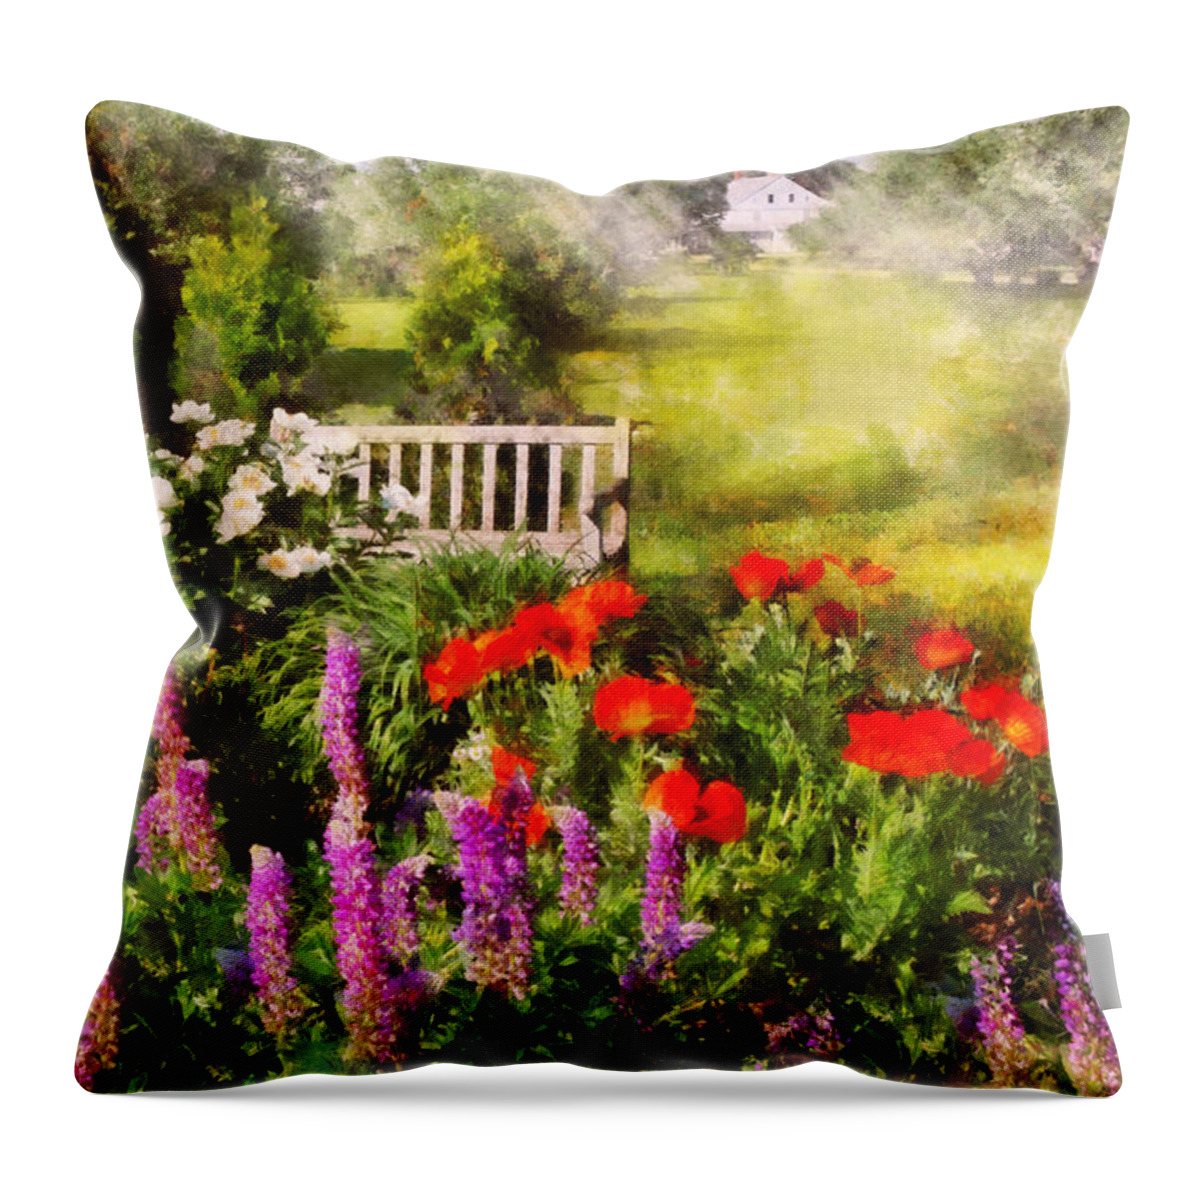 Savad Throw Pillow featuring the photograph Flower - Poppy - Piece of heaven by Mike Savad